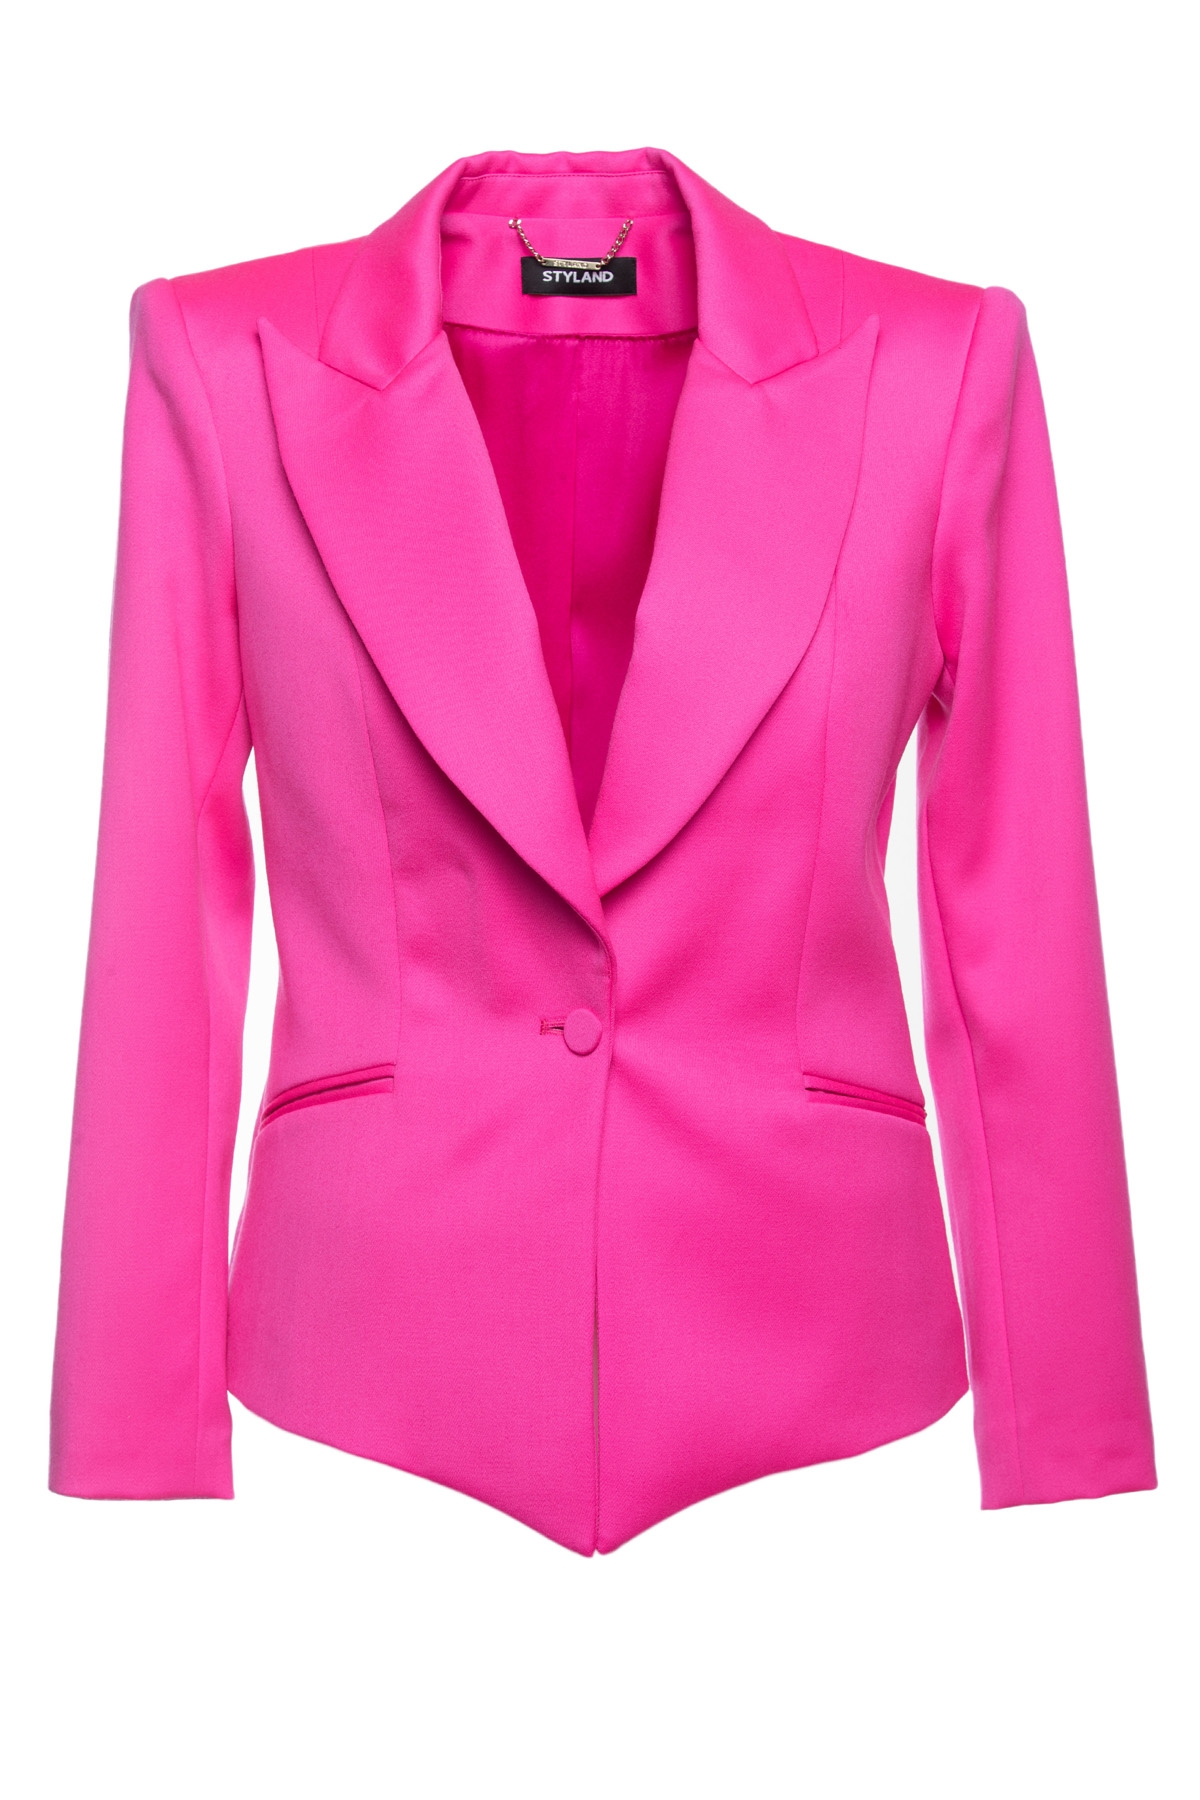 HOT PINK BLAZER WITH OVER-SIZED SHOULDERS - STYLAND